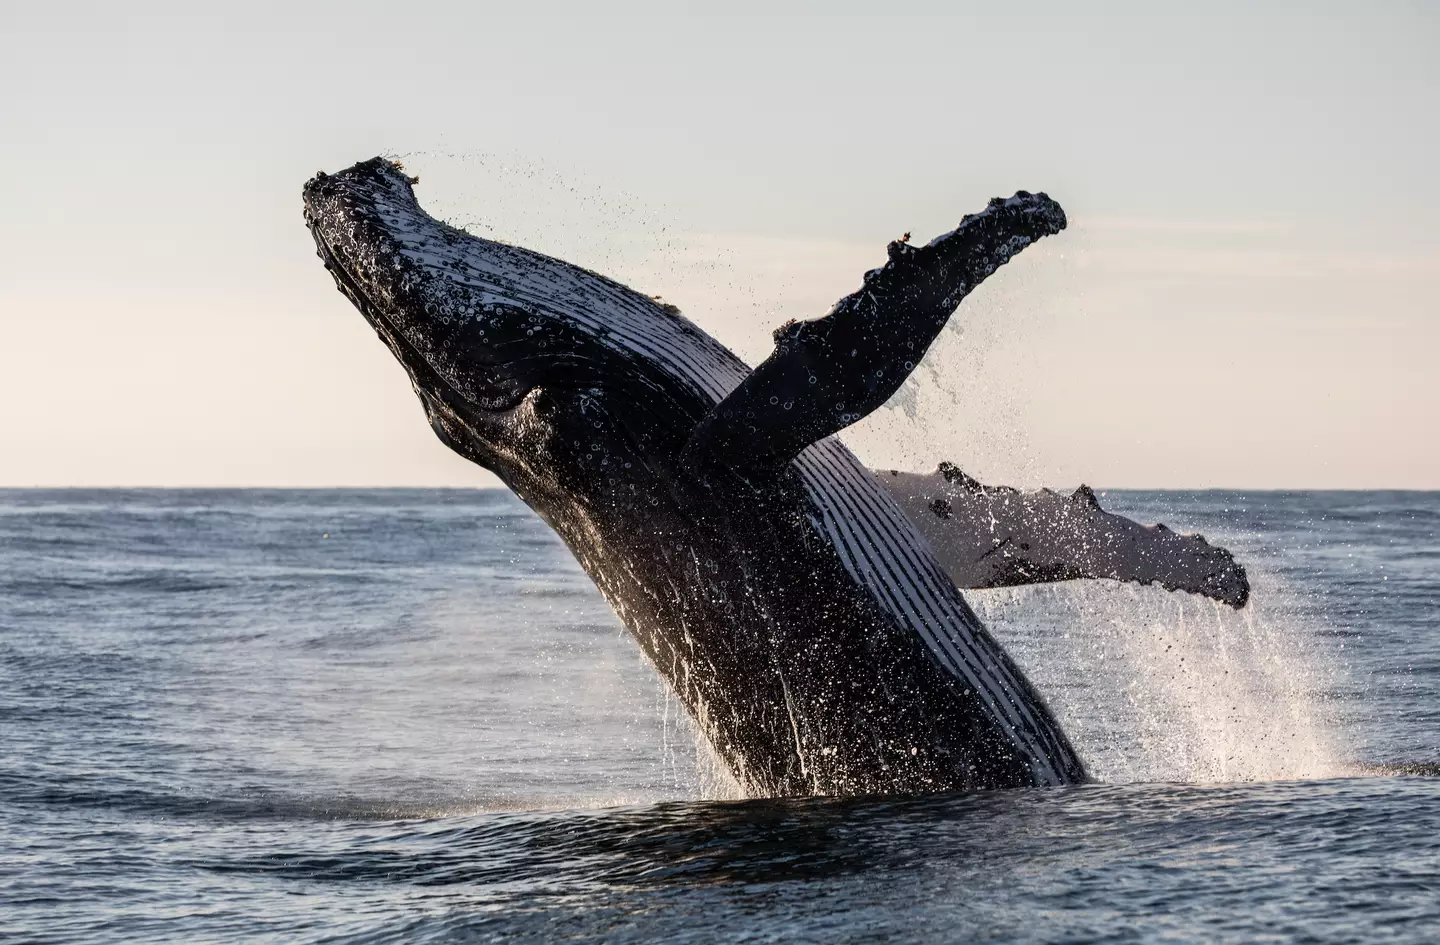 Despite their good intentions, maritime authorities said their actions were against the law and risked injury from a distressed and unpredictable whale. (Getty Stock Image)